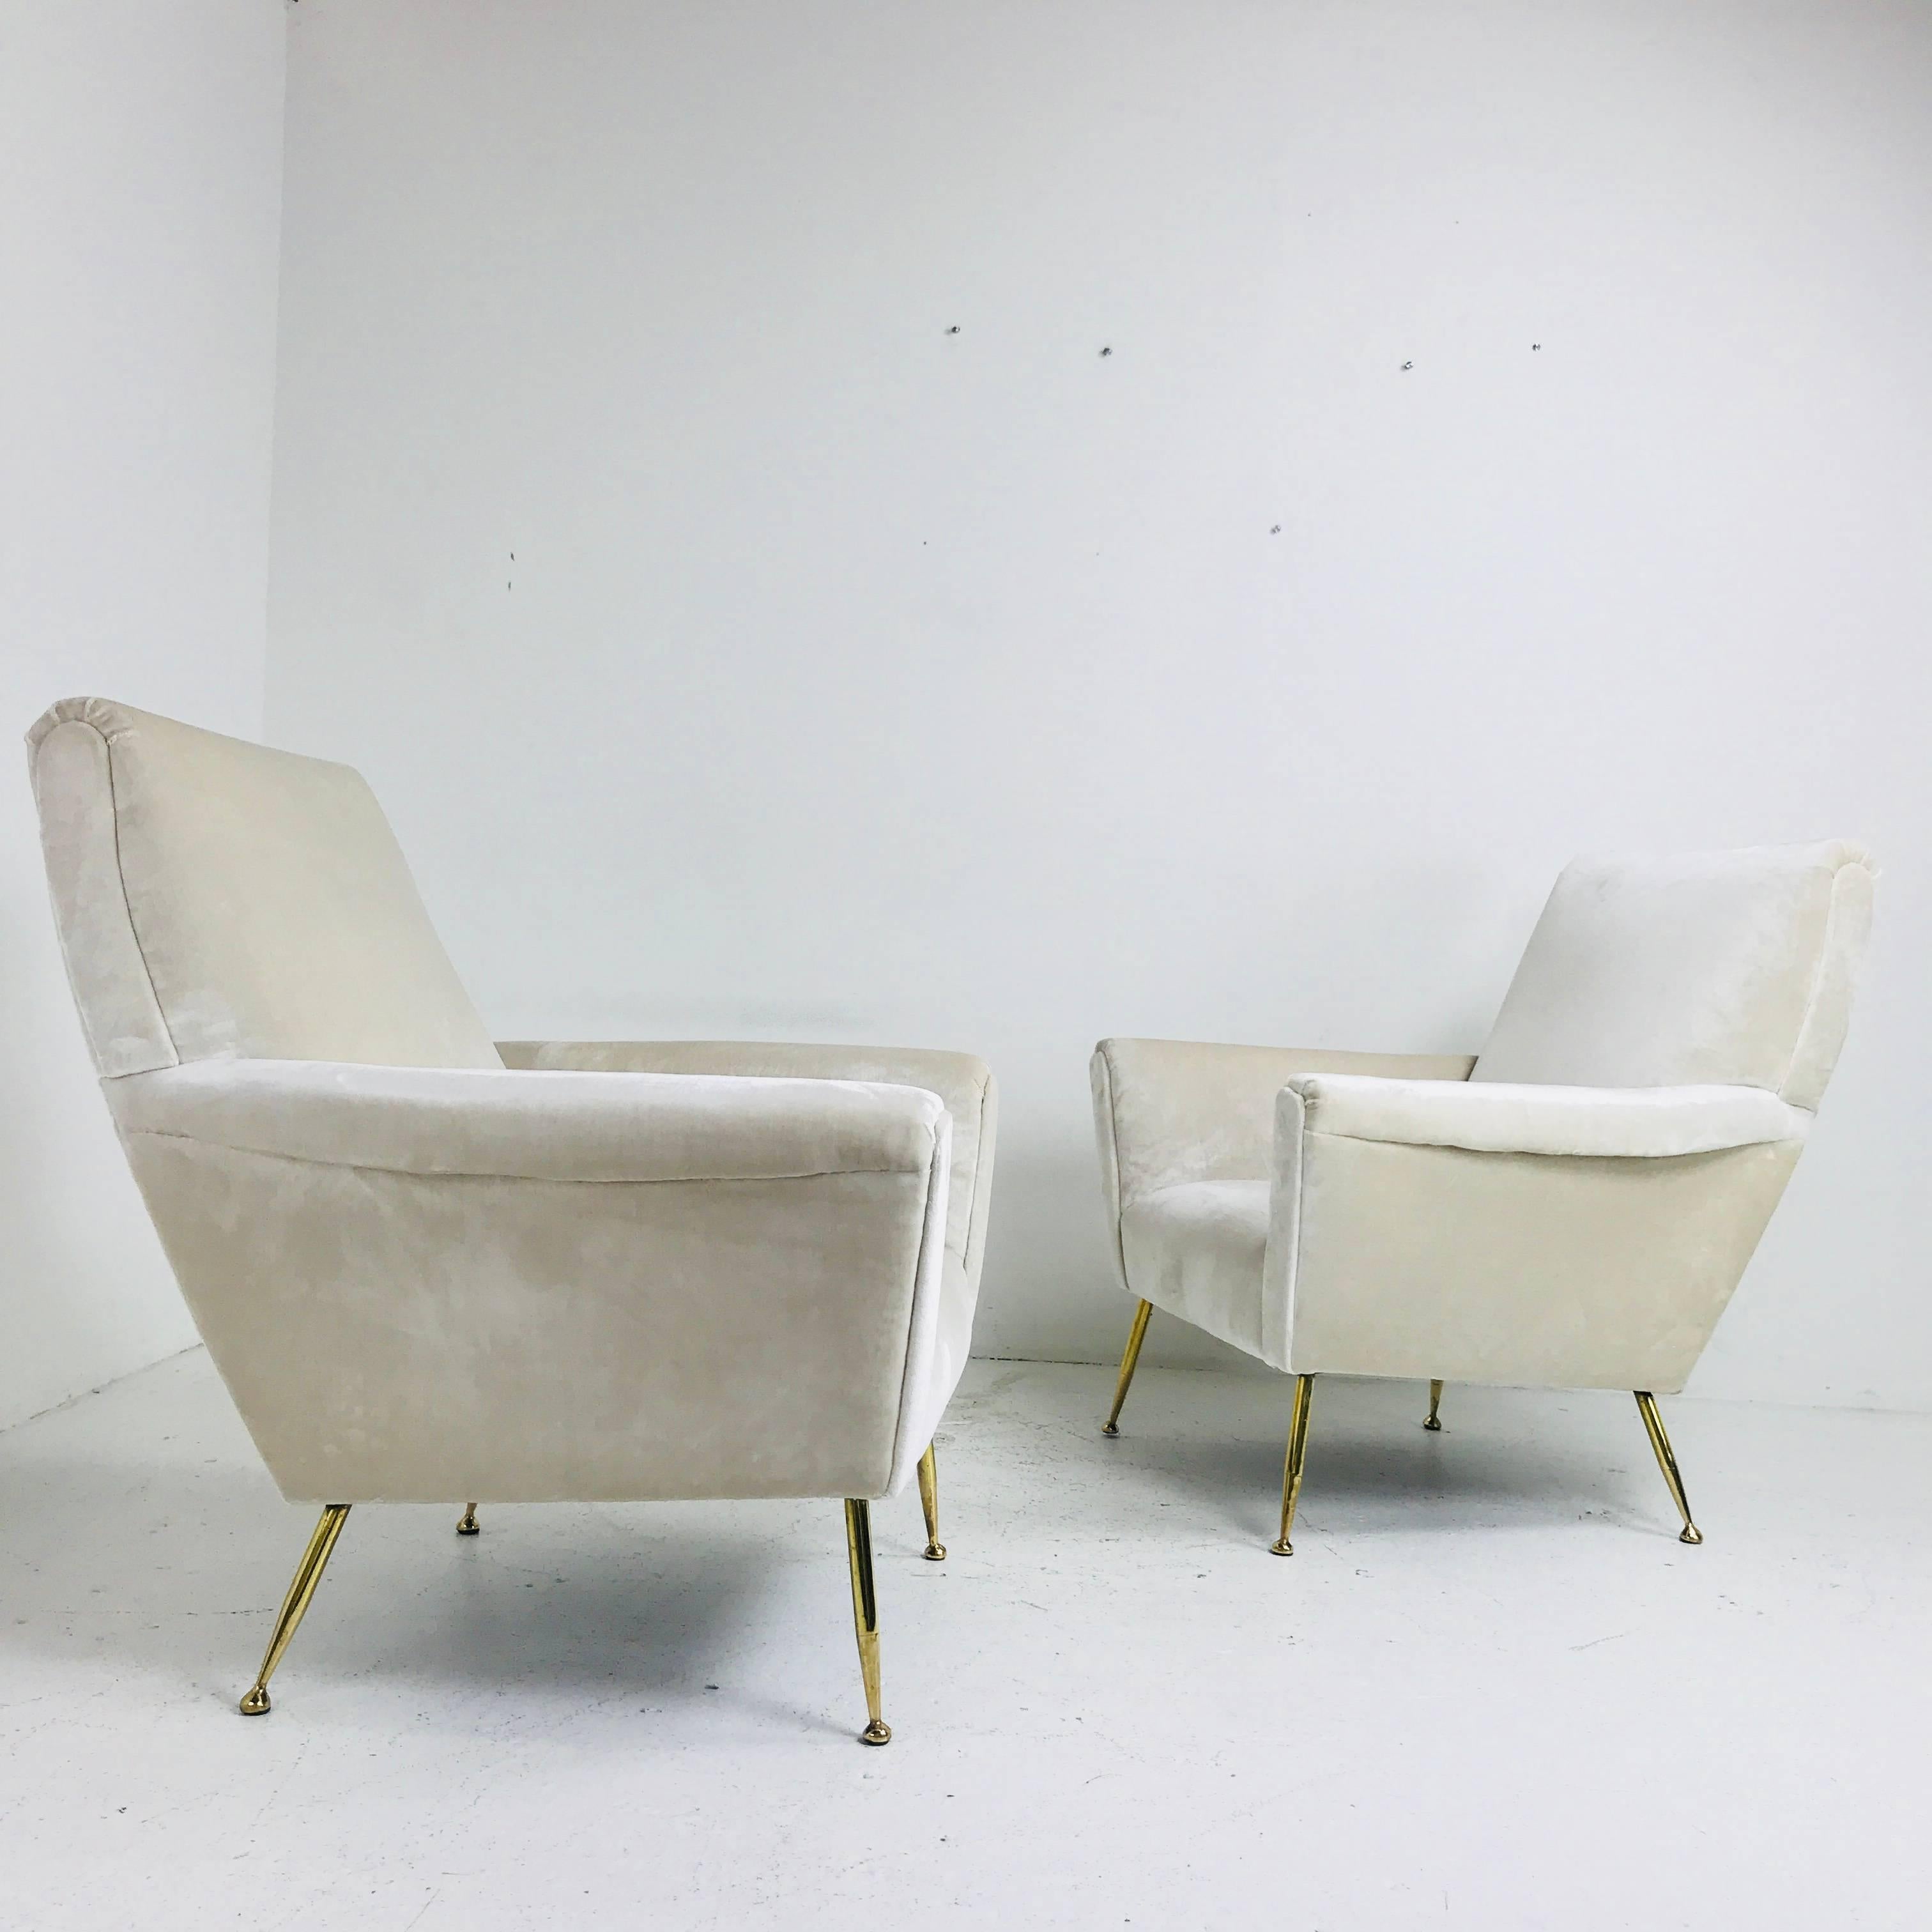 Plated Pair of Vintage Italian Lounge Chairs with Brass Legs